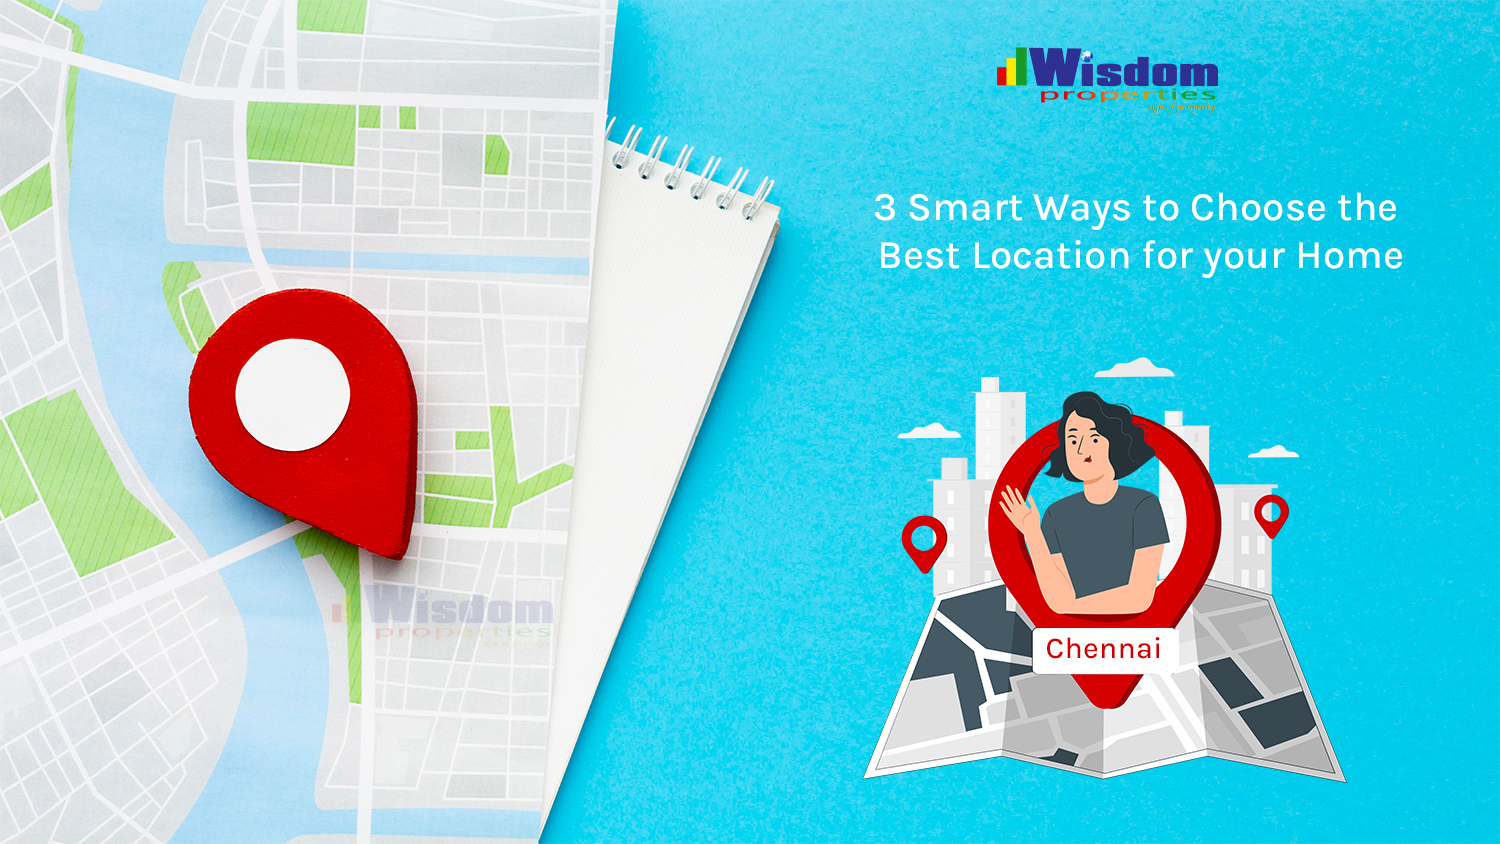 3 Smart Ways to Choose the Best Location for your Home